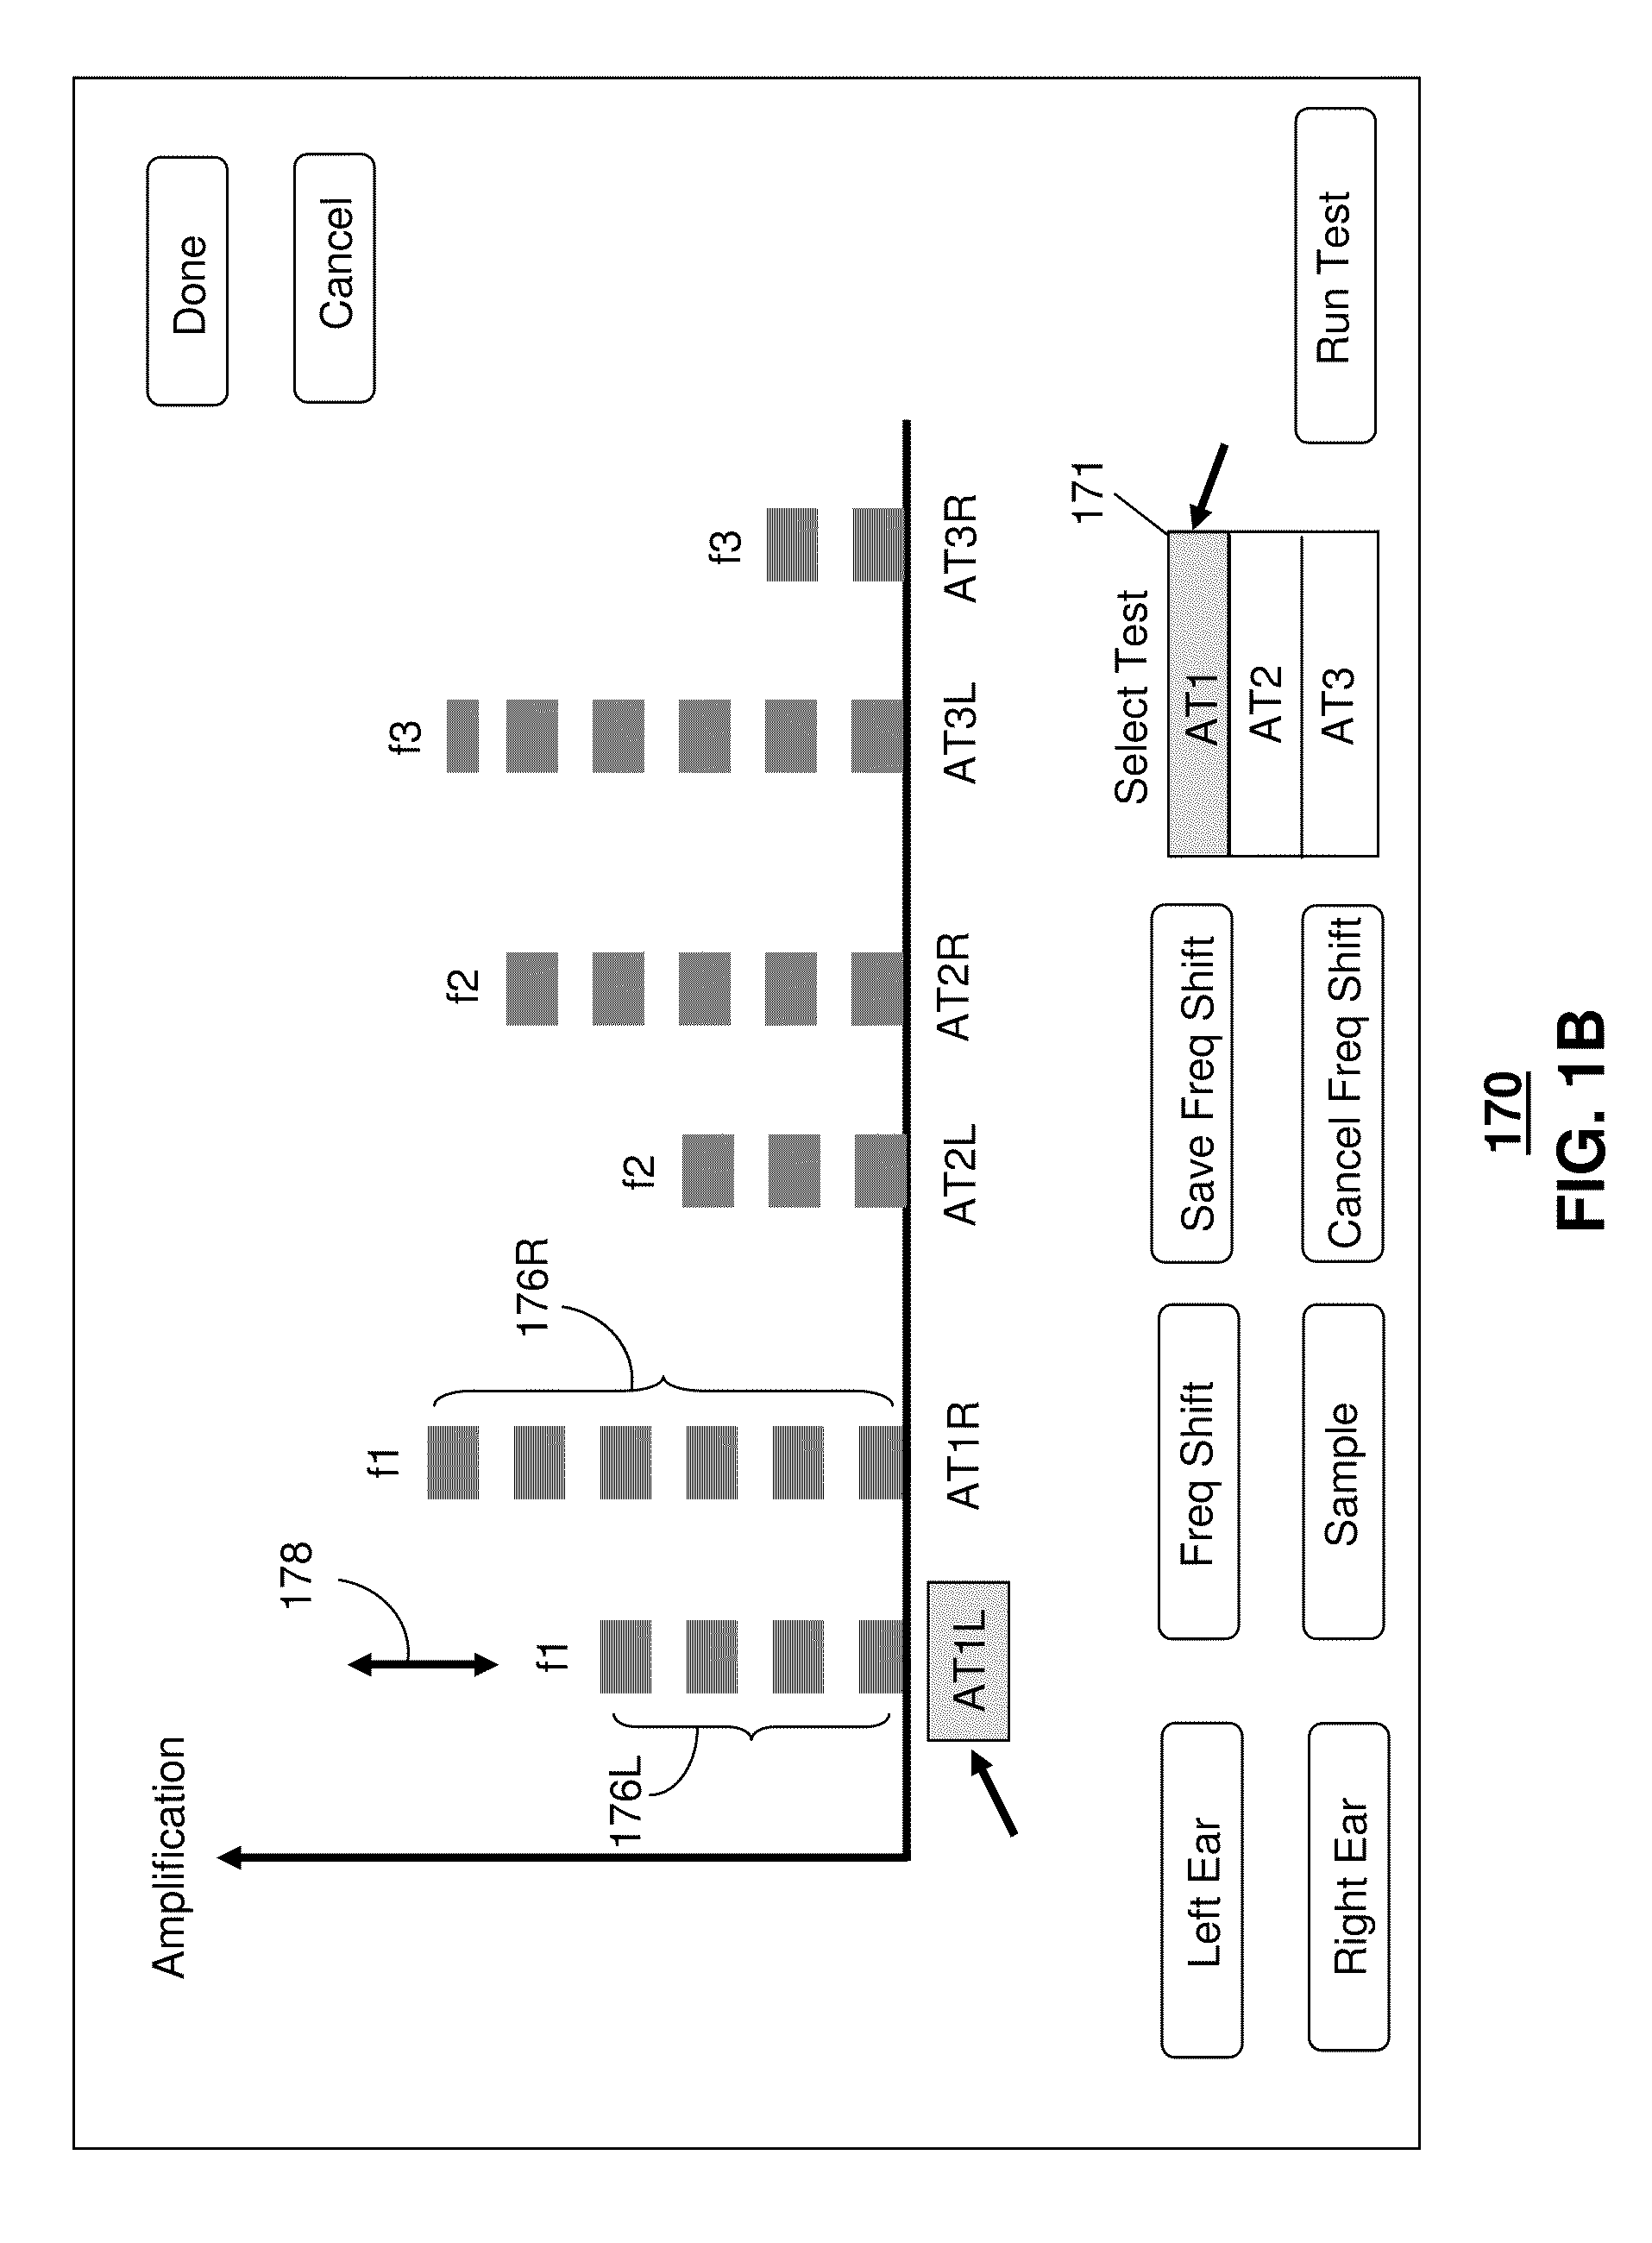 Apparatus and method for enhancing sound produced by a gaming application